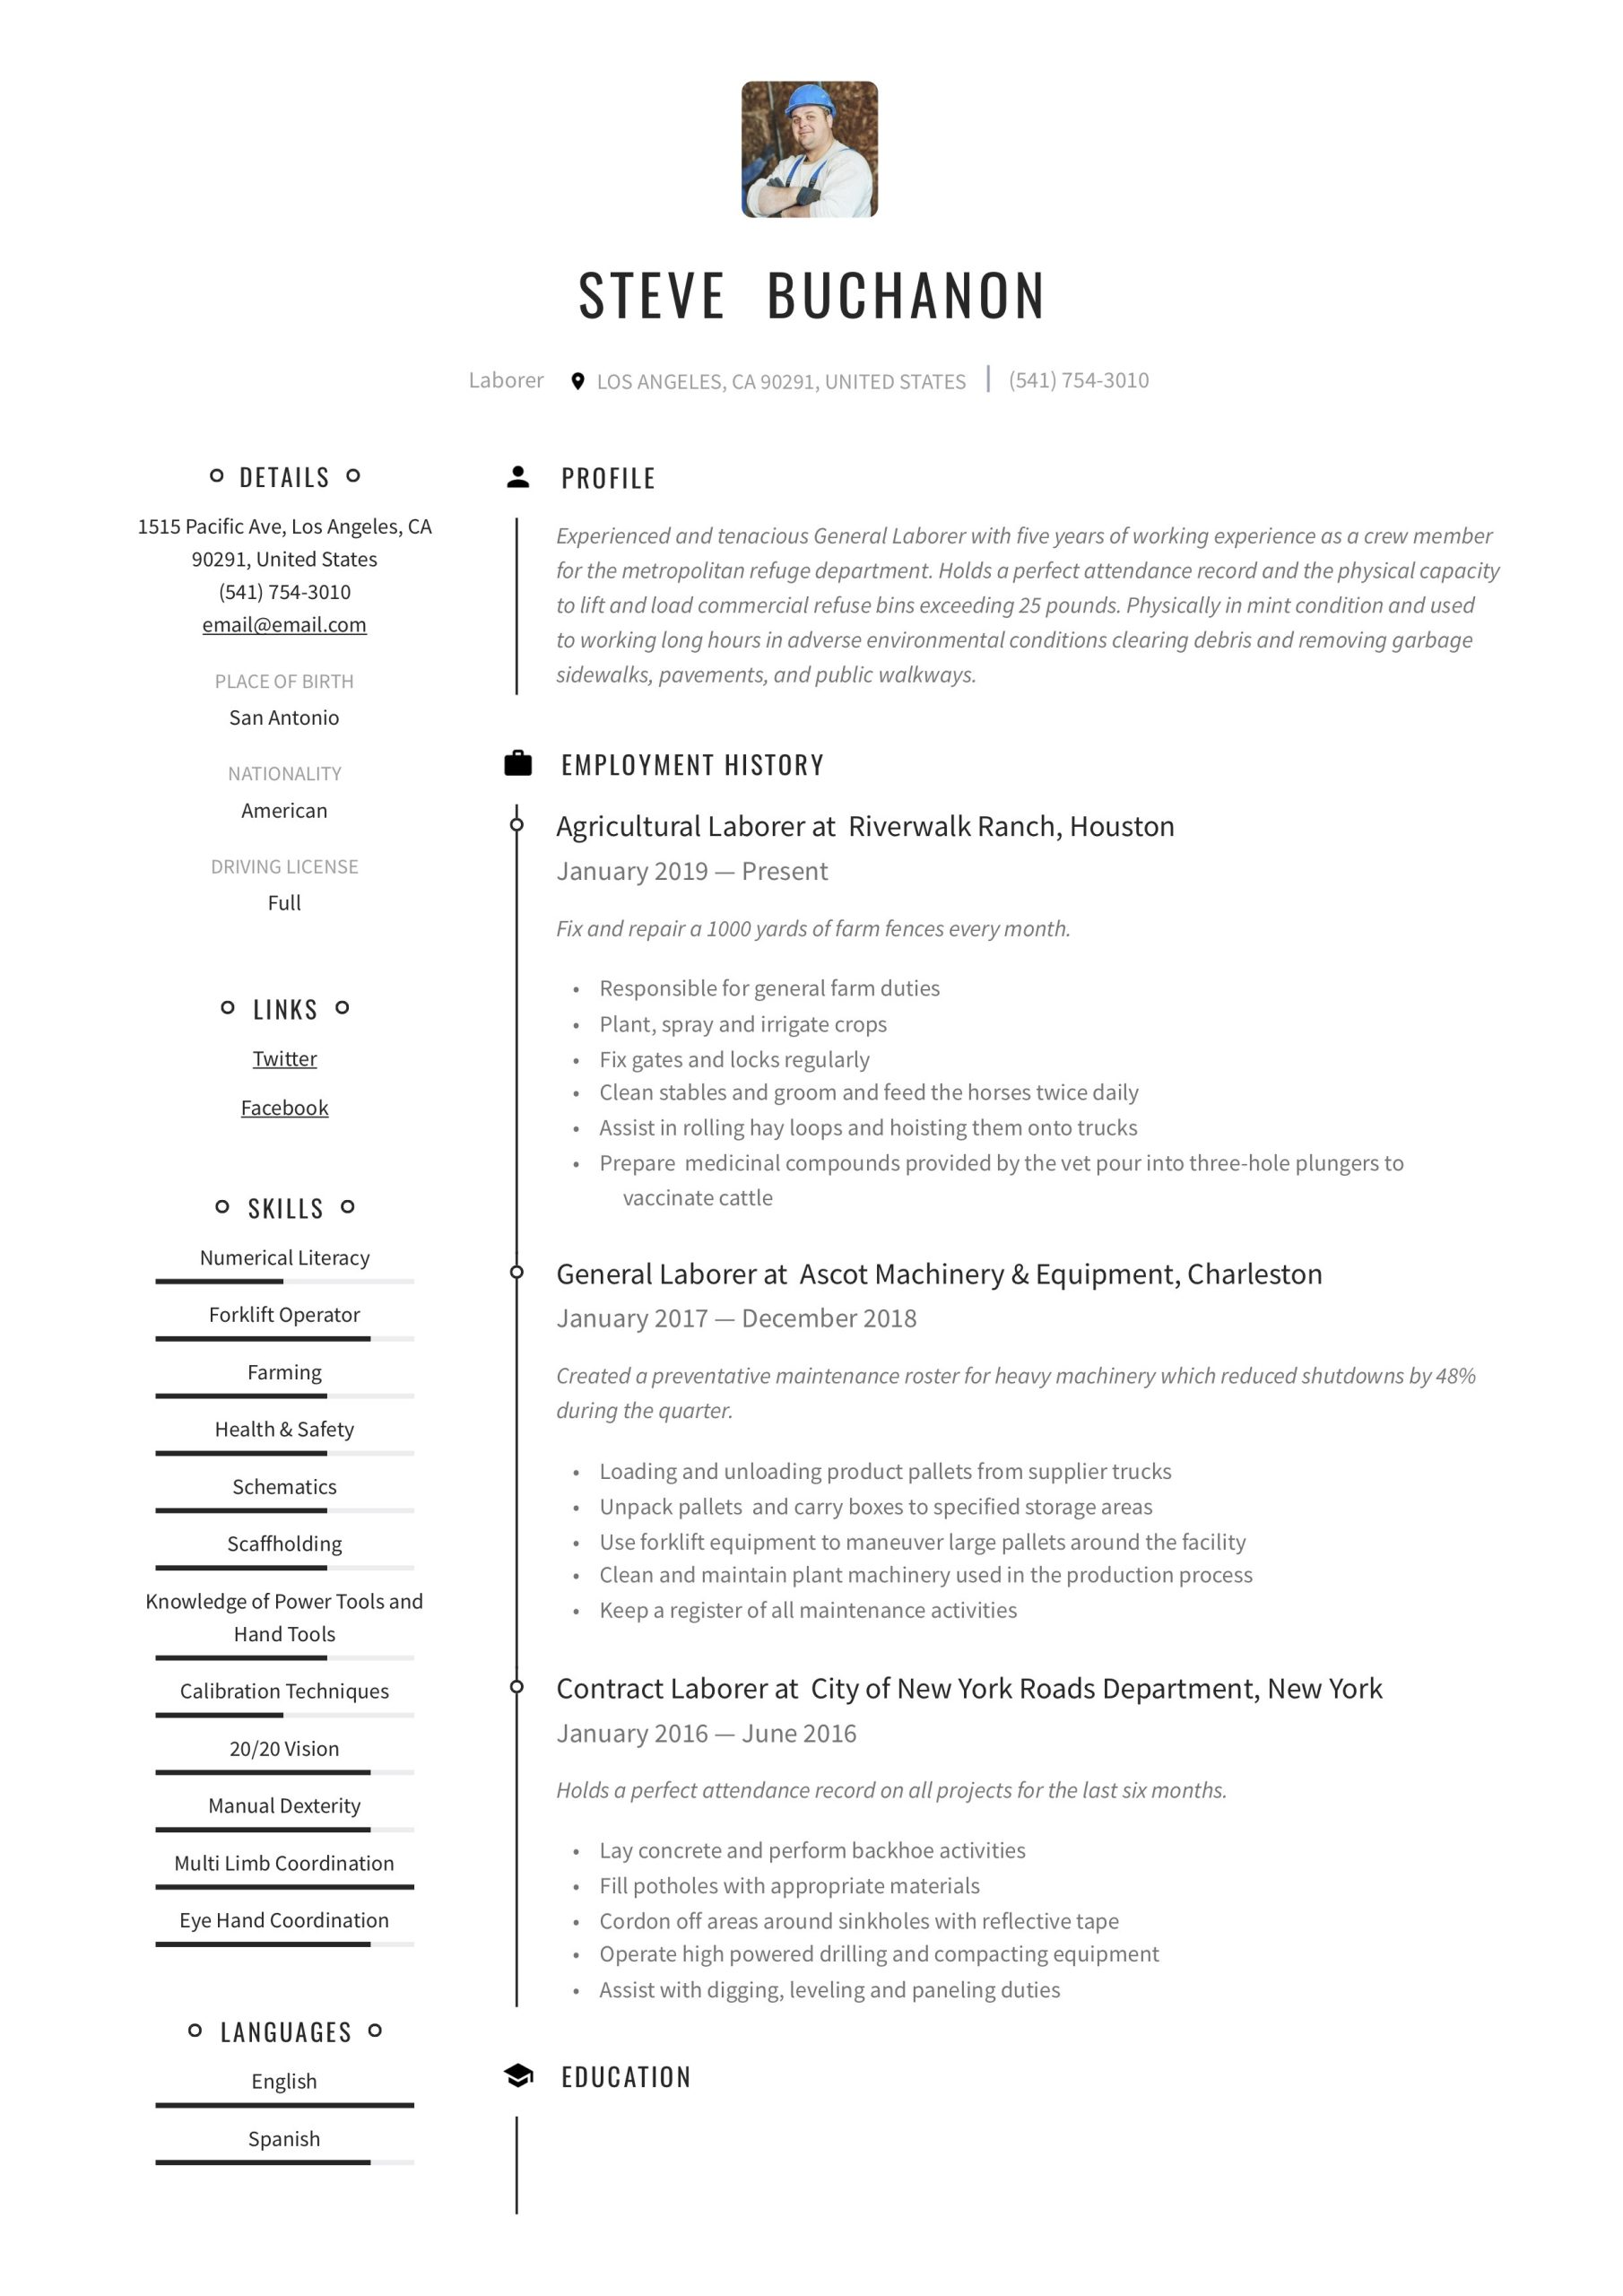 Resume Samples Glass and Window Worker General Laborer Resume & Writing Guide  12 Free Templates 2022